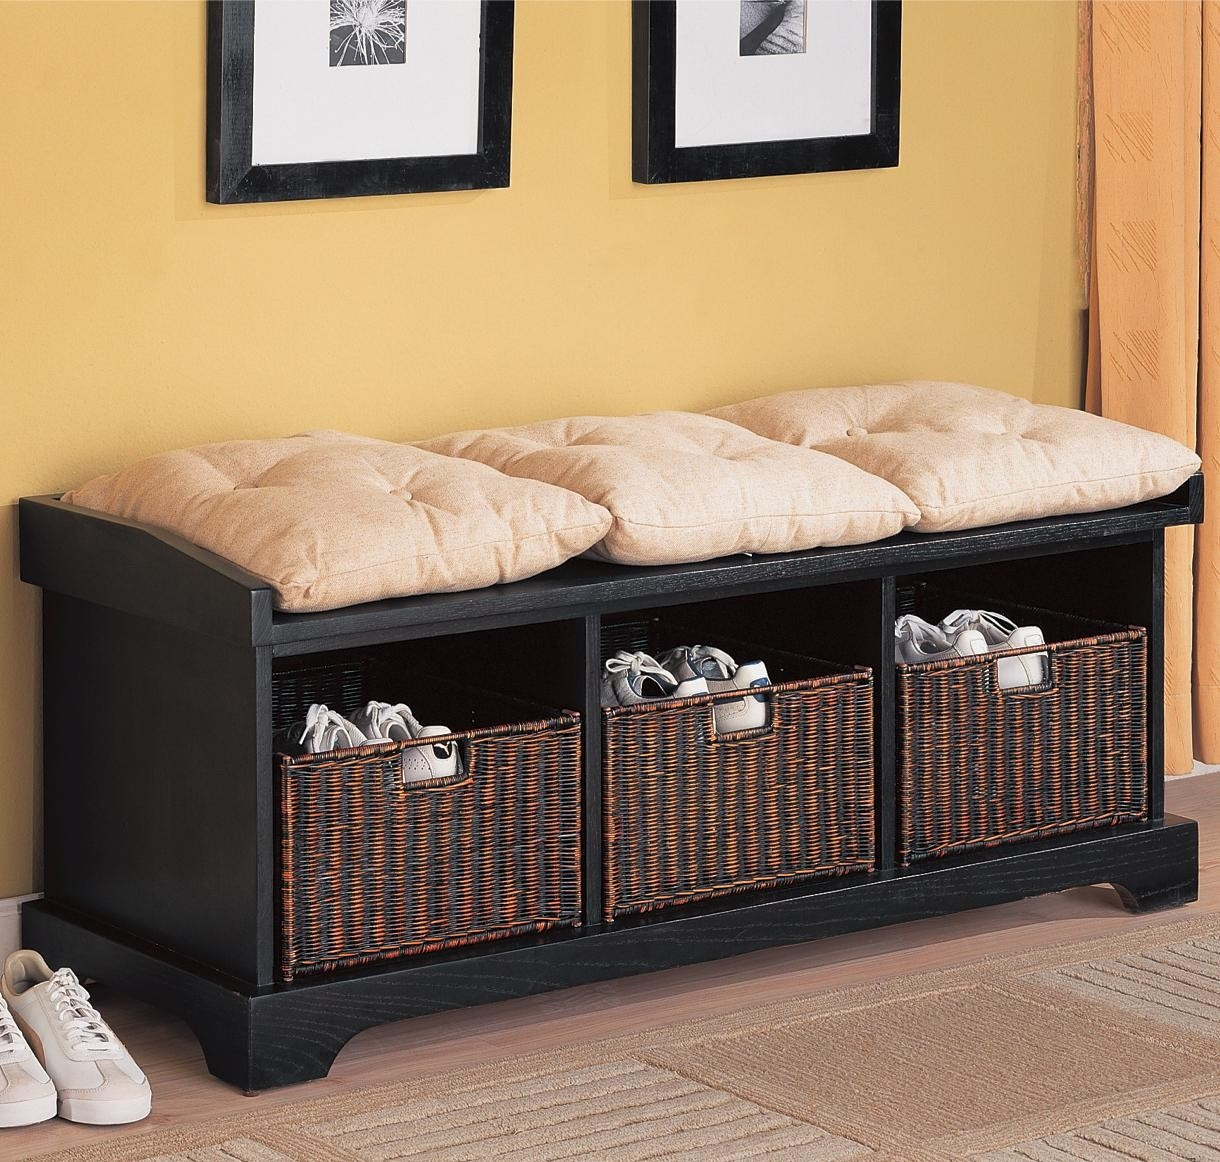 Large Storage Bench For Bedroom
 Bedroom Storage Benches